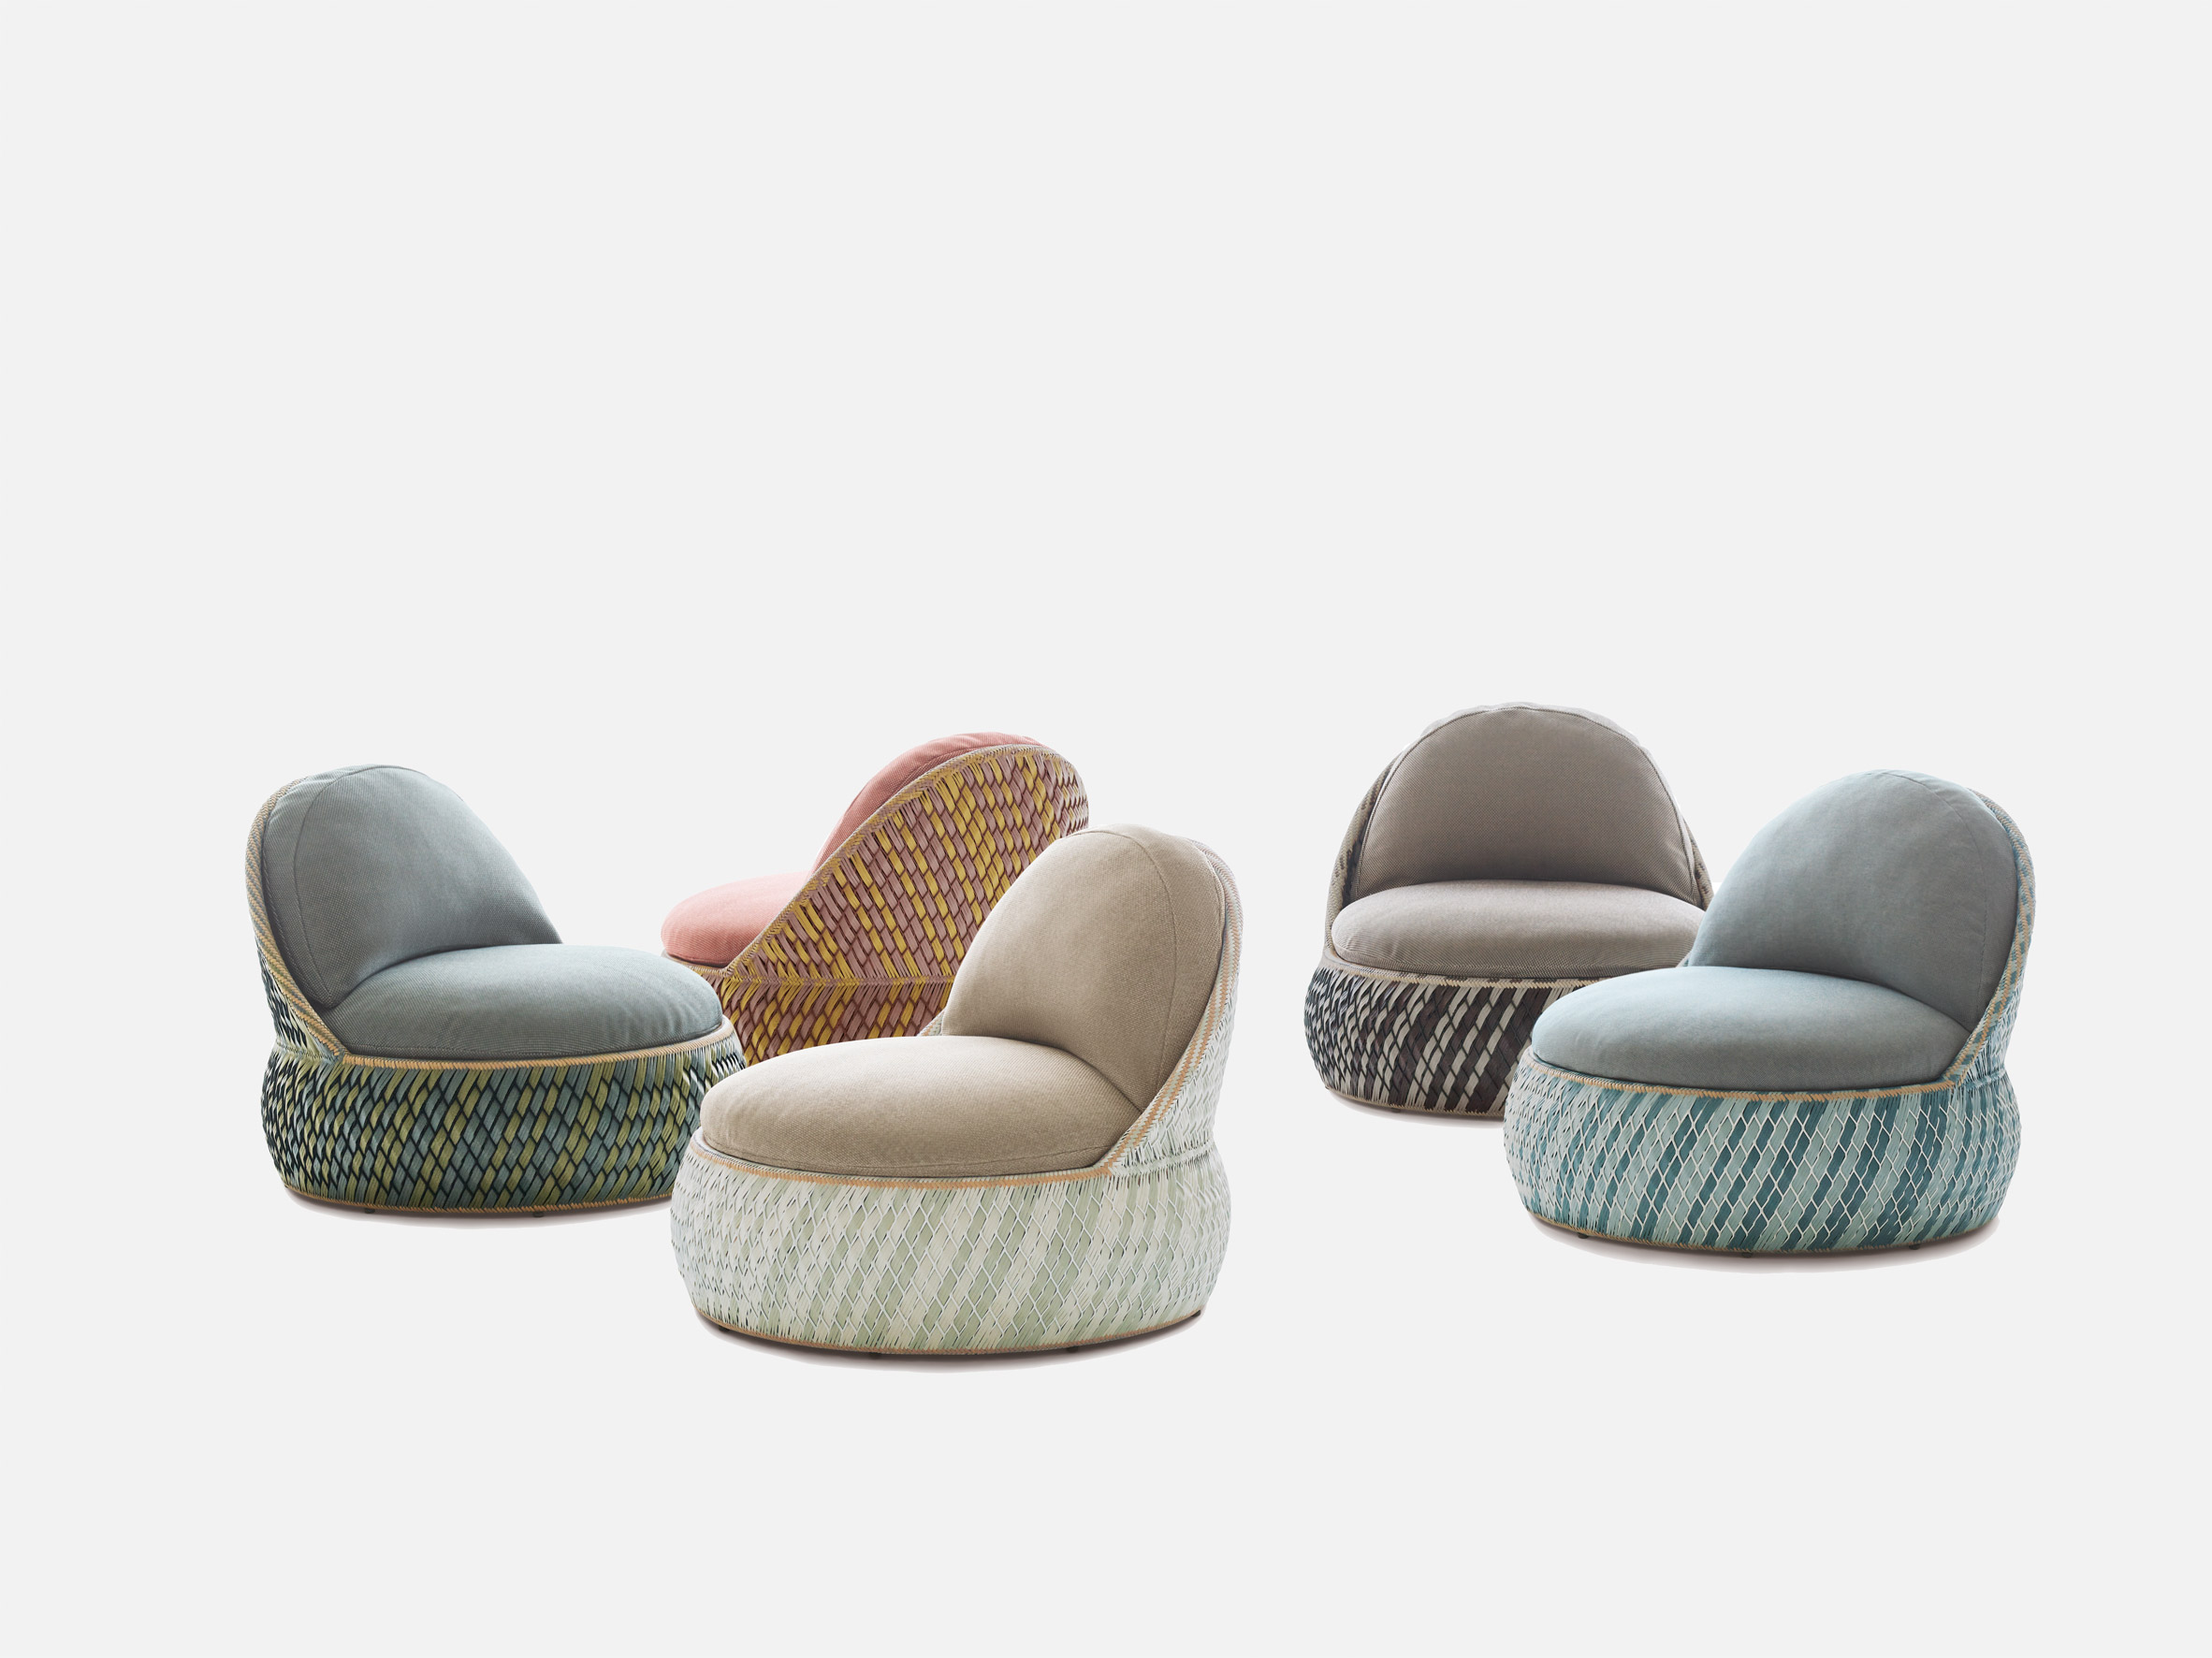 Dala seating woven using Filipino craft techniques by Stephen Burks for Dedon